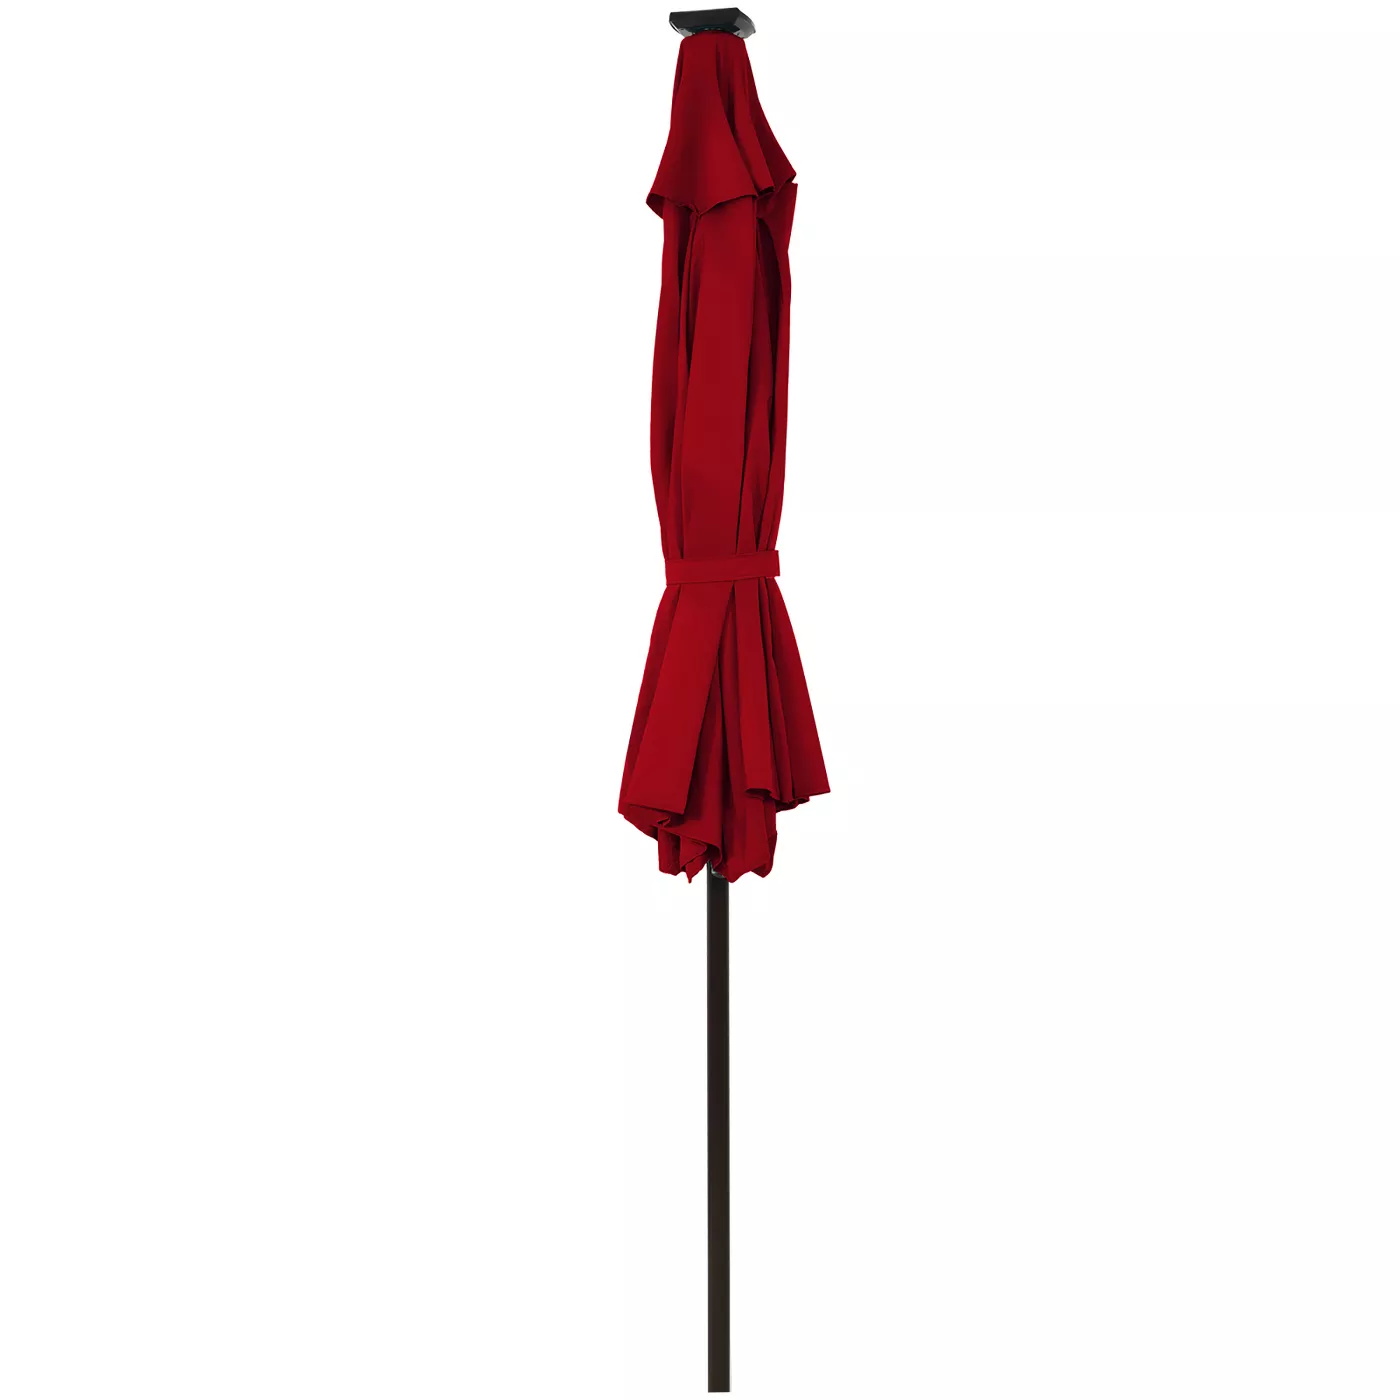 Outdoor wholesale umbrella with lights